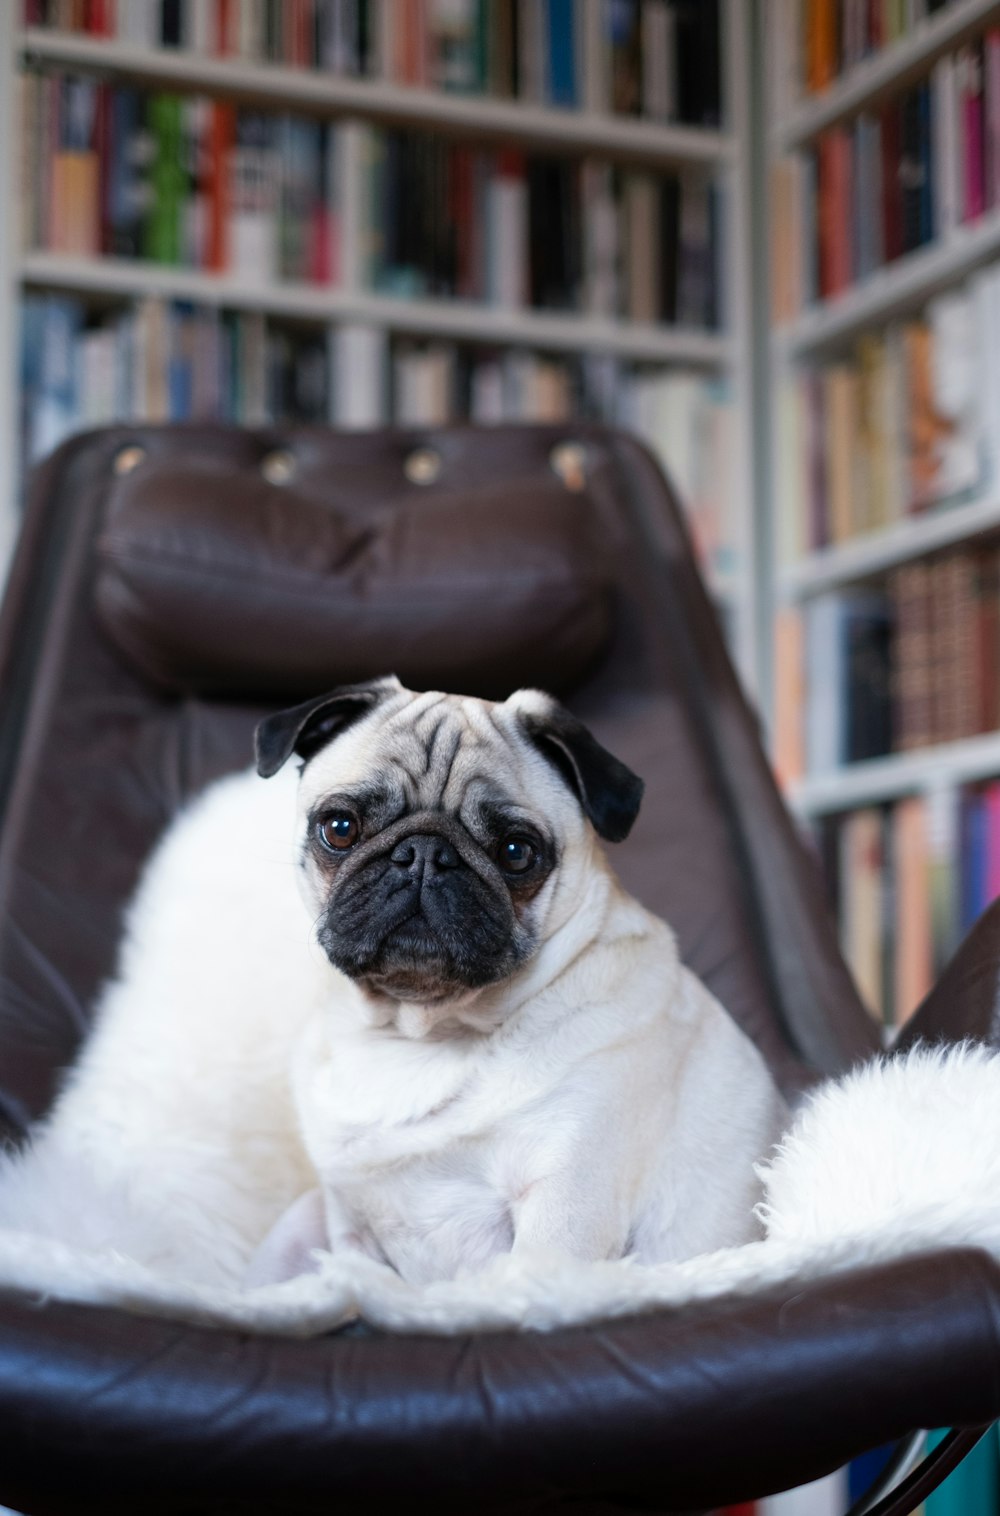 a pug dog sitting in a leather chair in a library